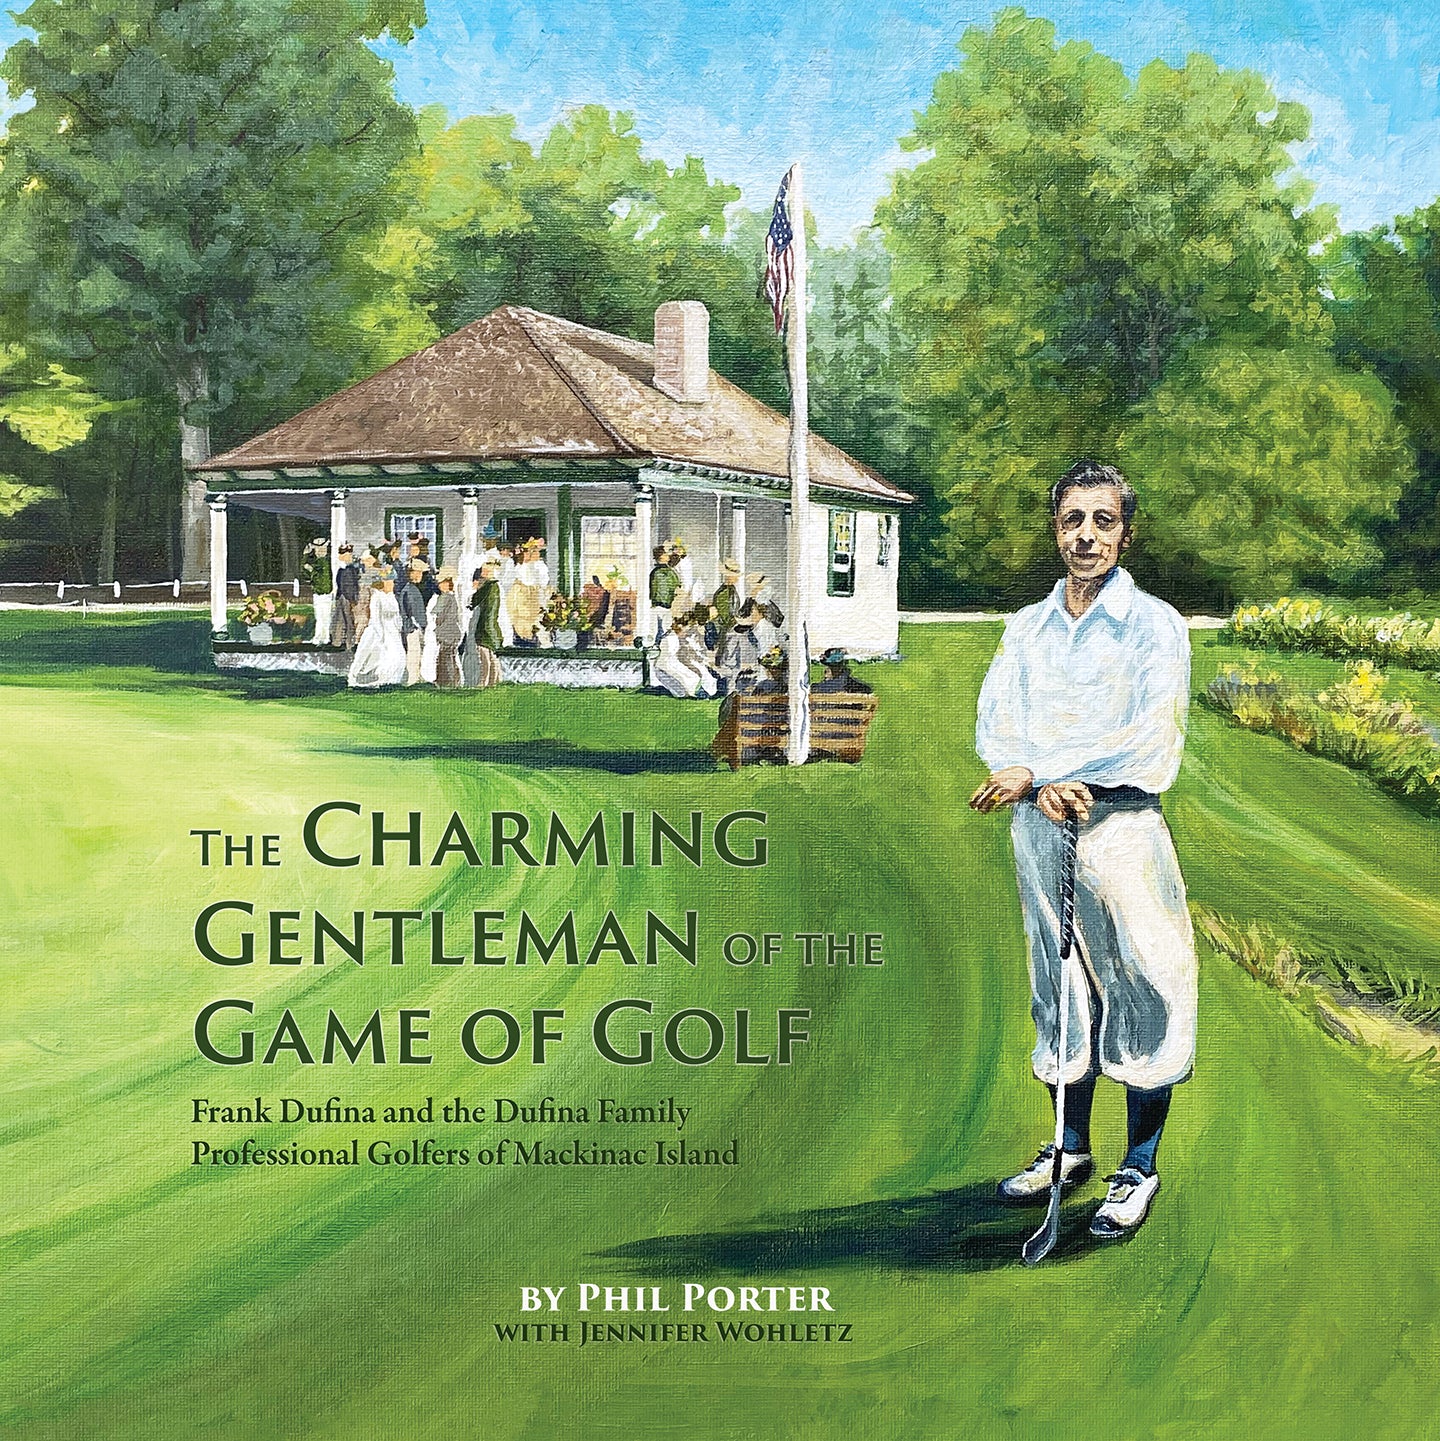 The Charming Gentleman of Golf Book by Mackinac Island Historian Phil Porter with photography by Jennifer Wohletz.  Cover portrait of Wawashkamo Golf Course's legendary golf pro Frank Dufina by Natalia Wohletz.